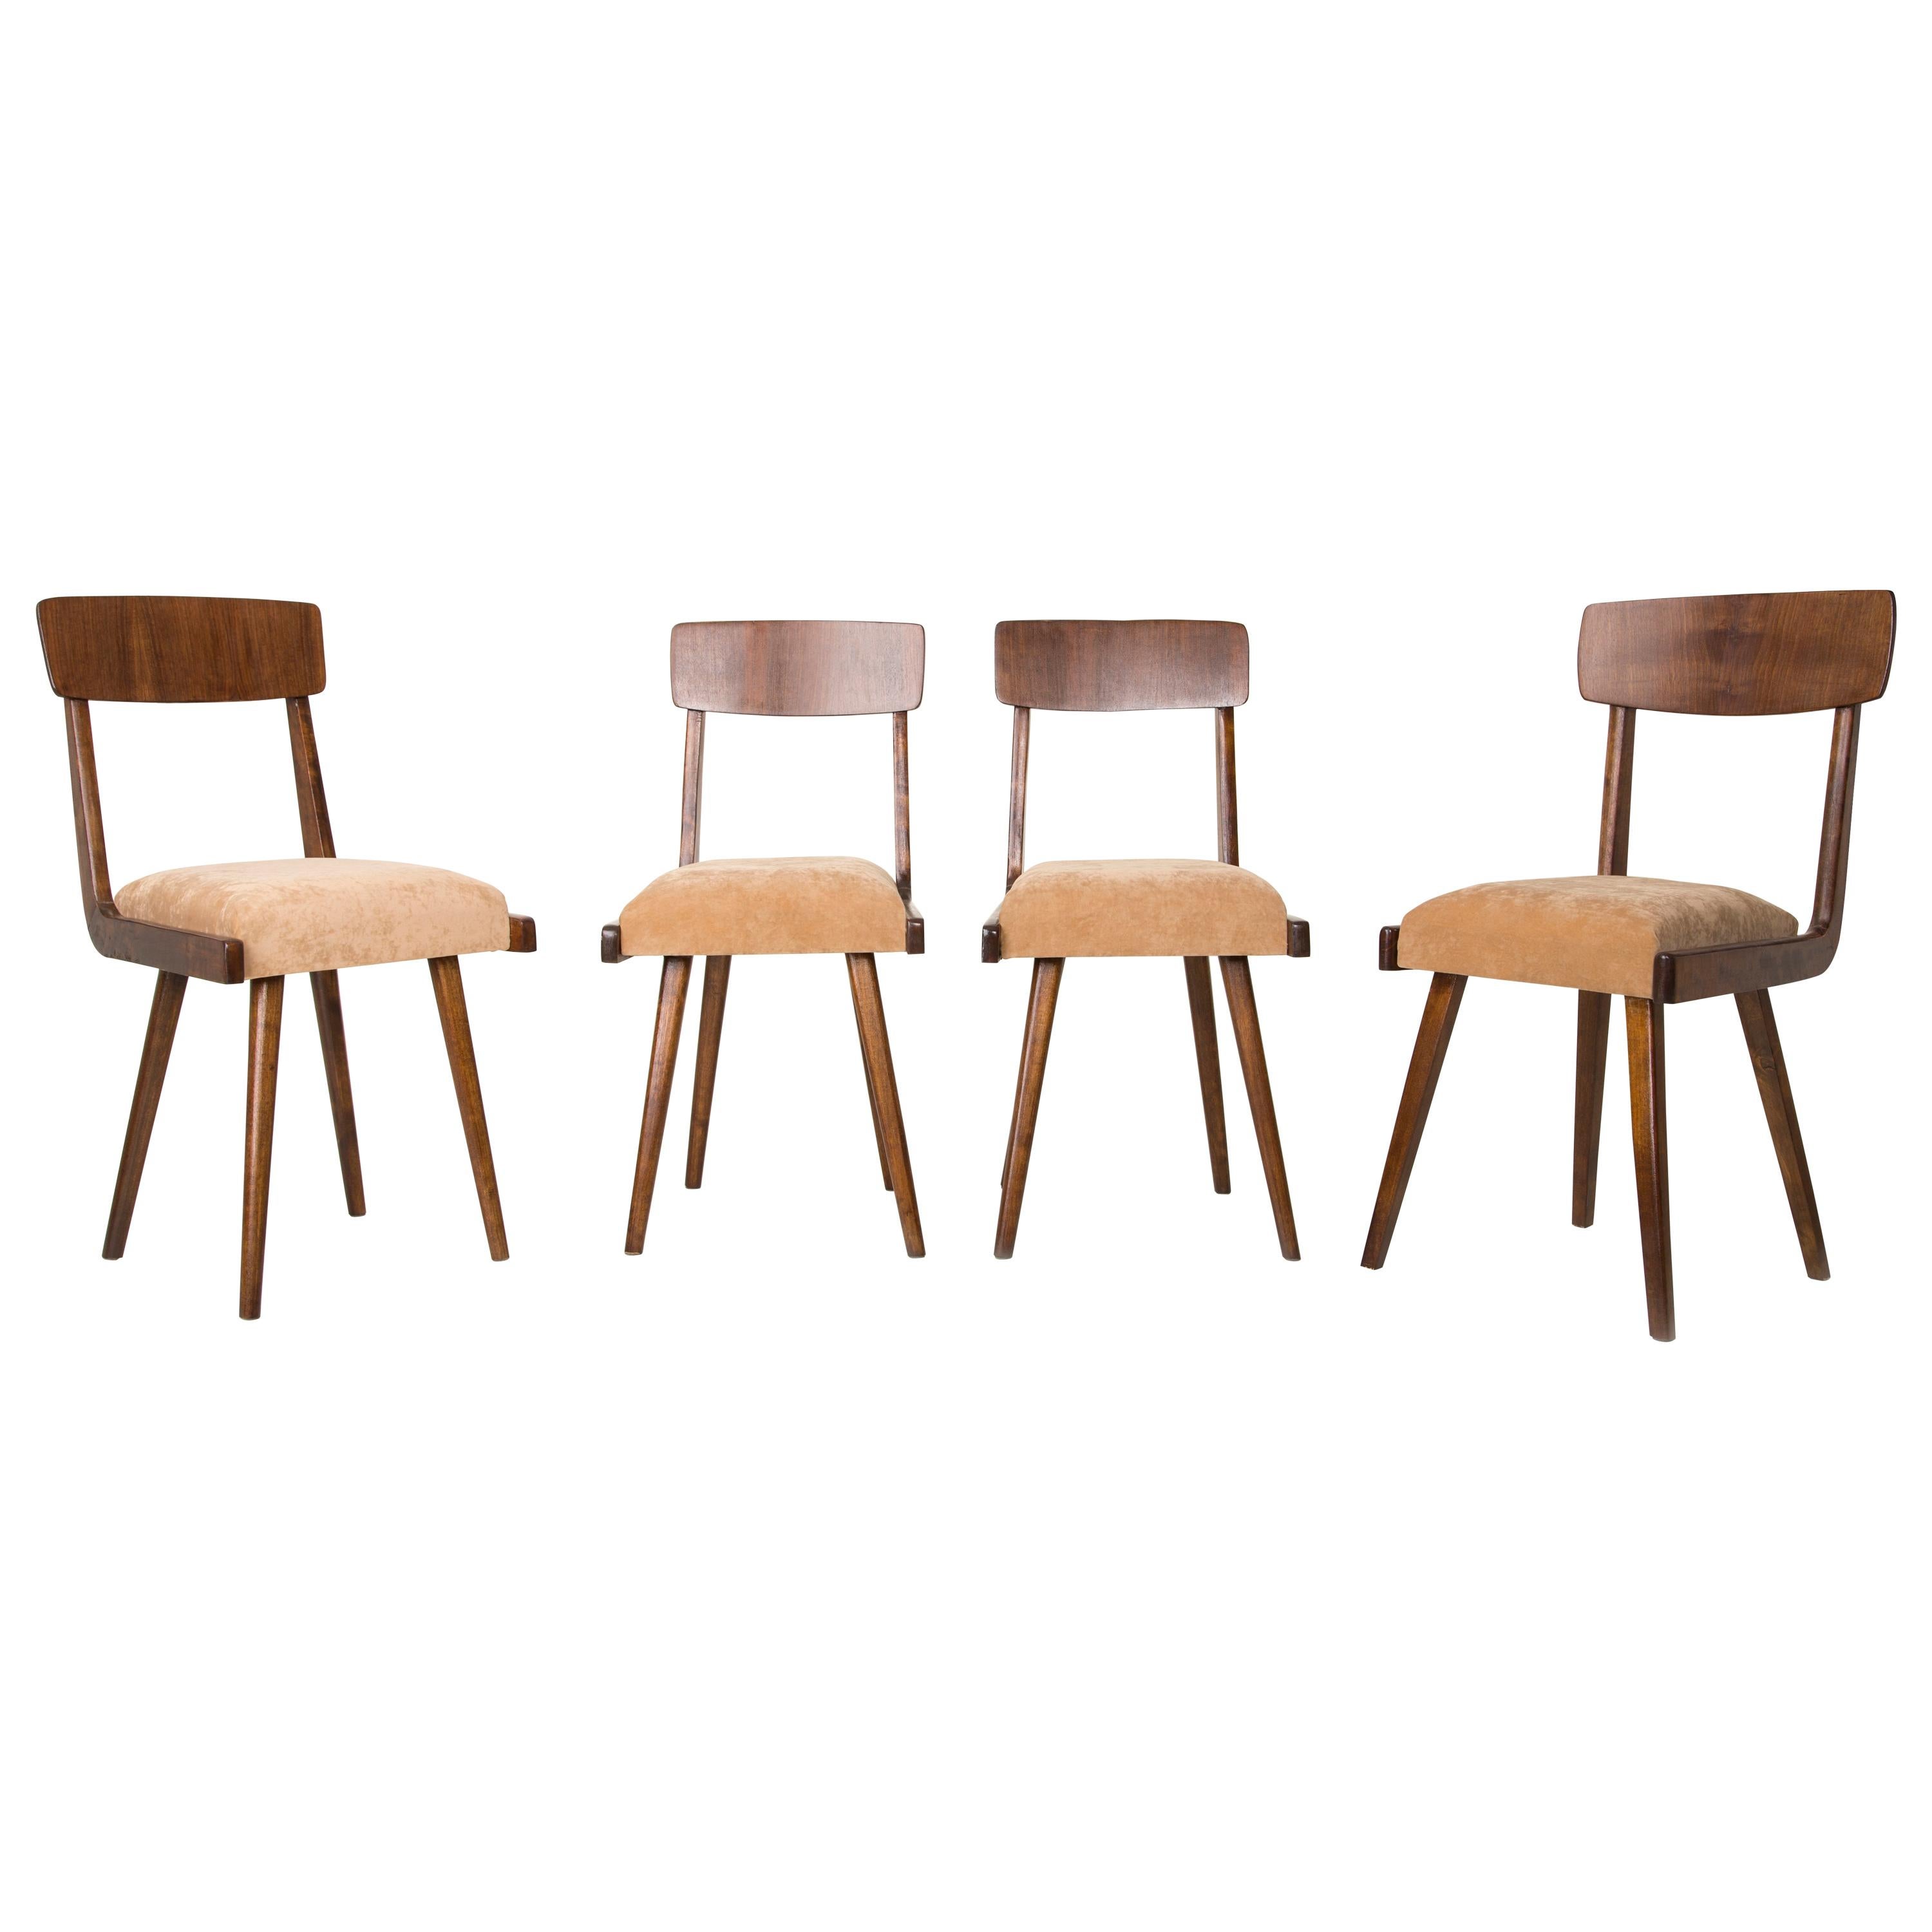 Set of Four 20th Century Gazelle Beige Wood Chairs, 1960s For Sale